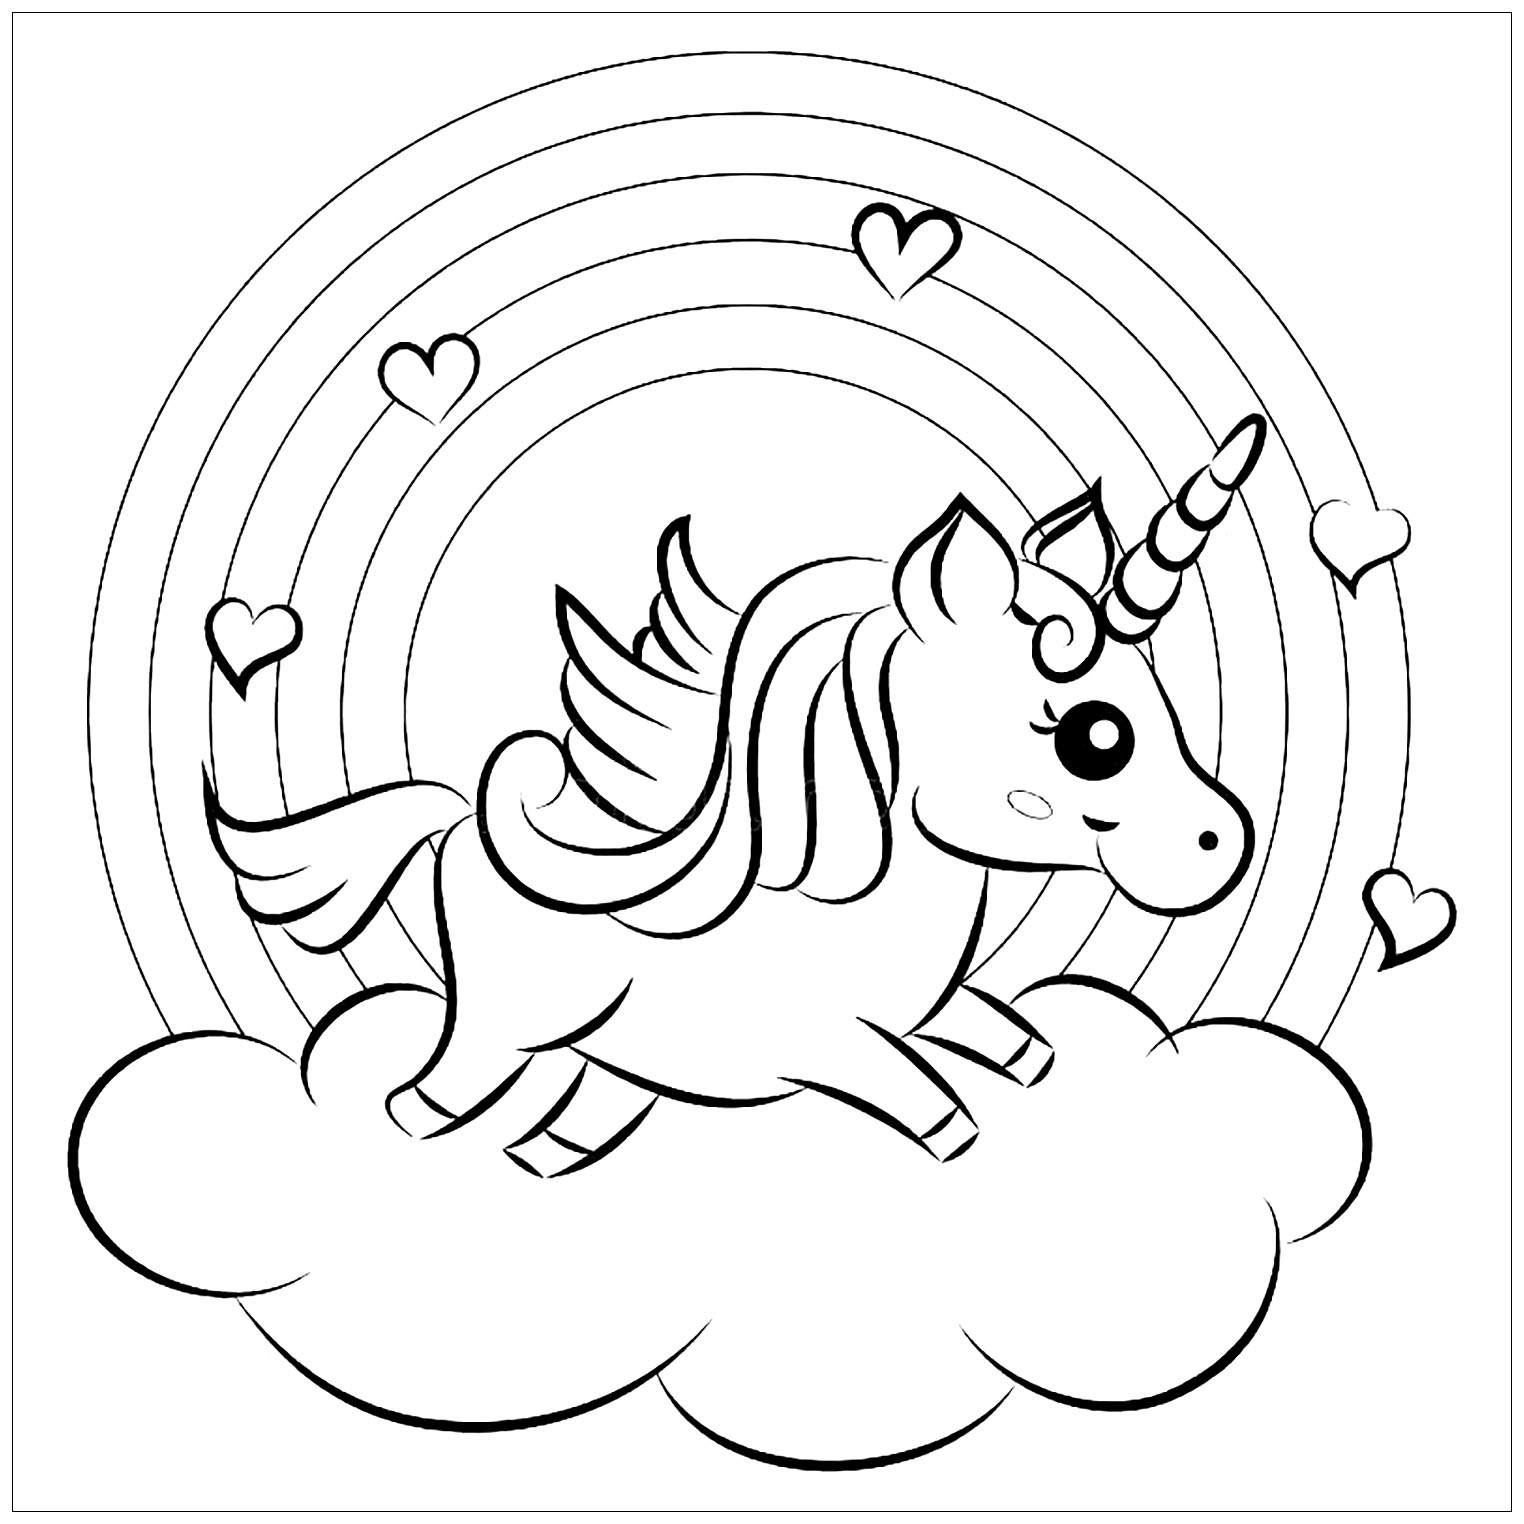 Unicorn Coloring Pages For Kids Unicorns Kids Coloring Pages